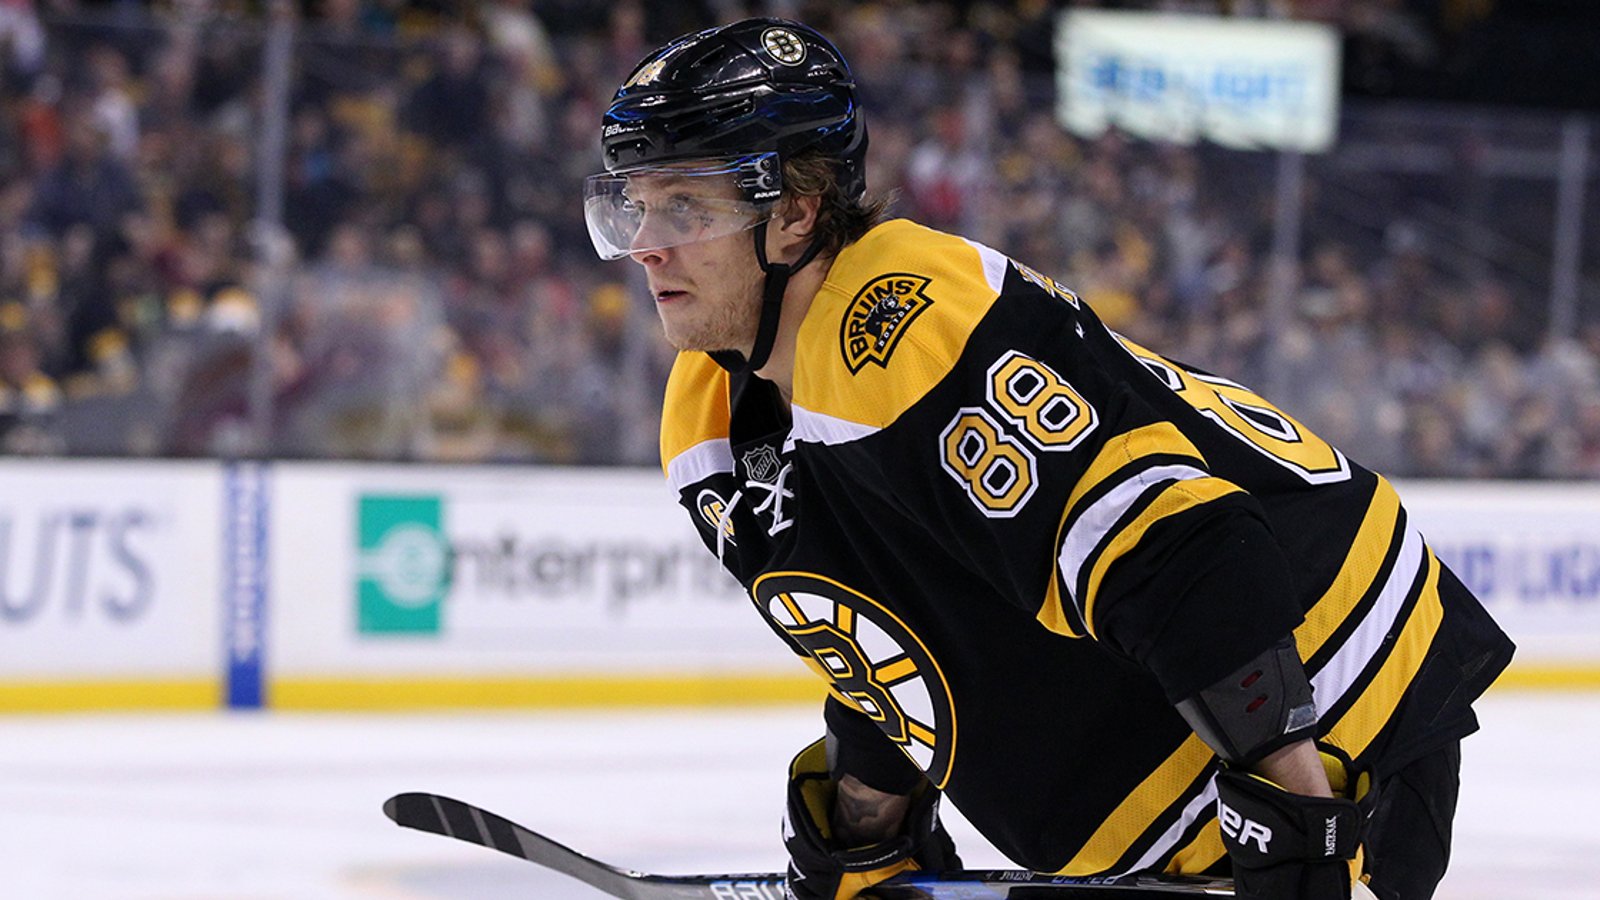 Must See: Pastrnak’s first big purchase with his $40 million paycheck